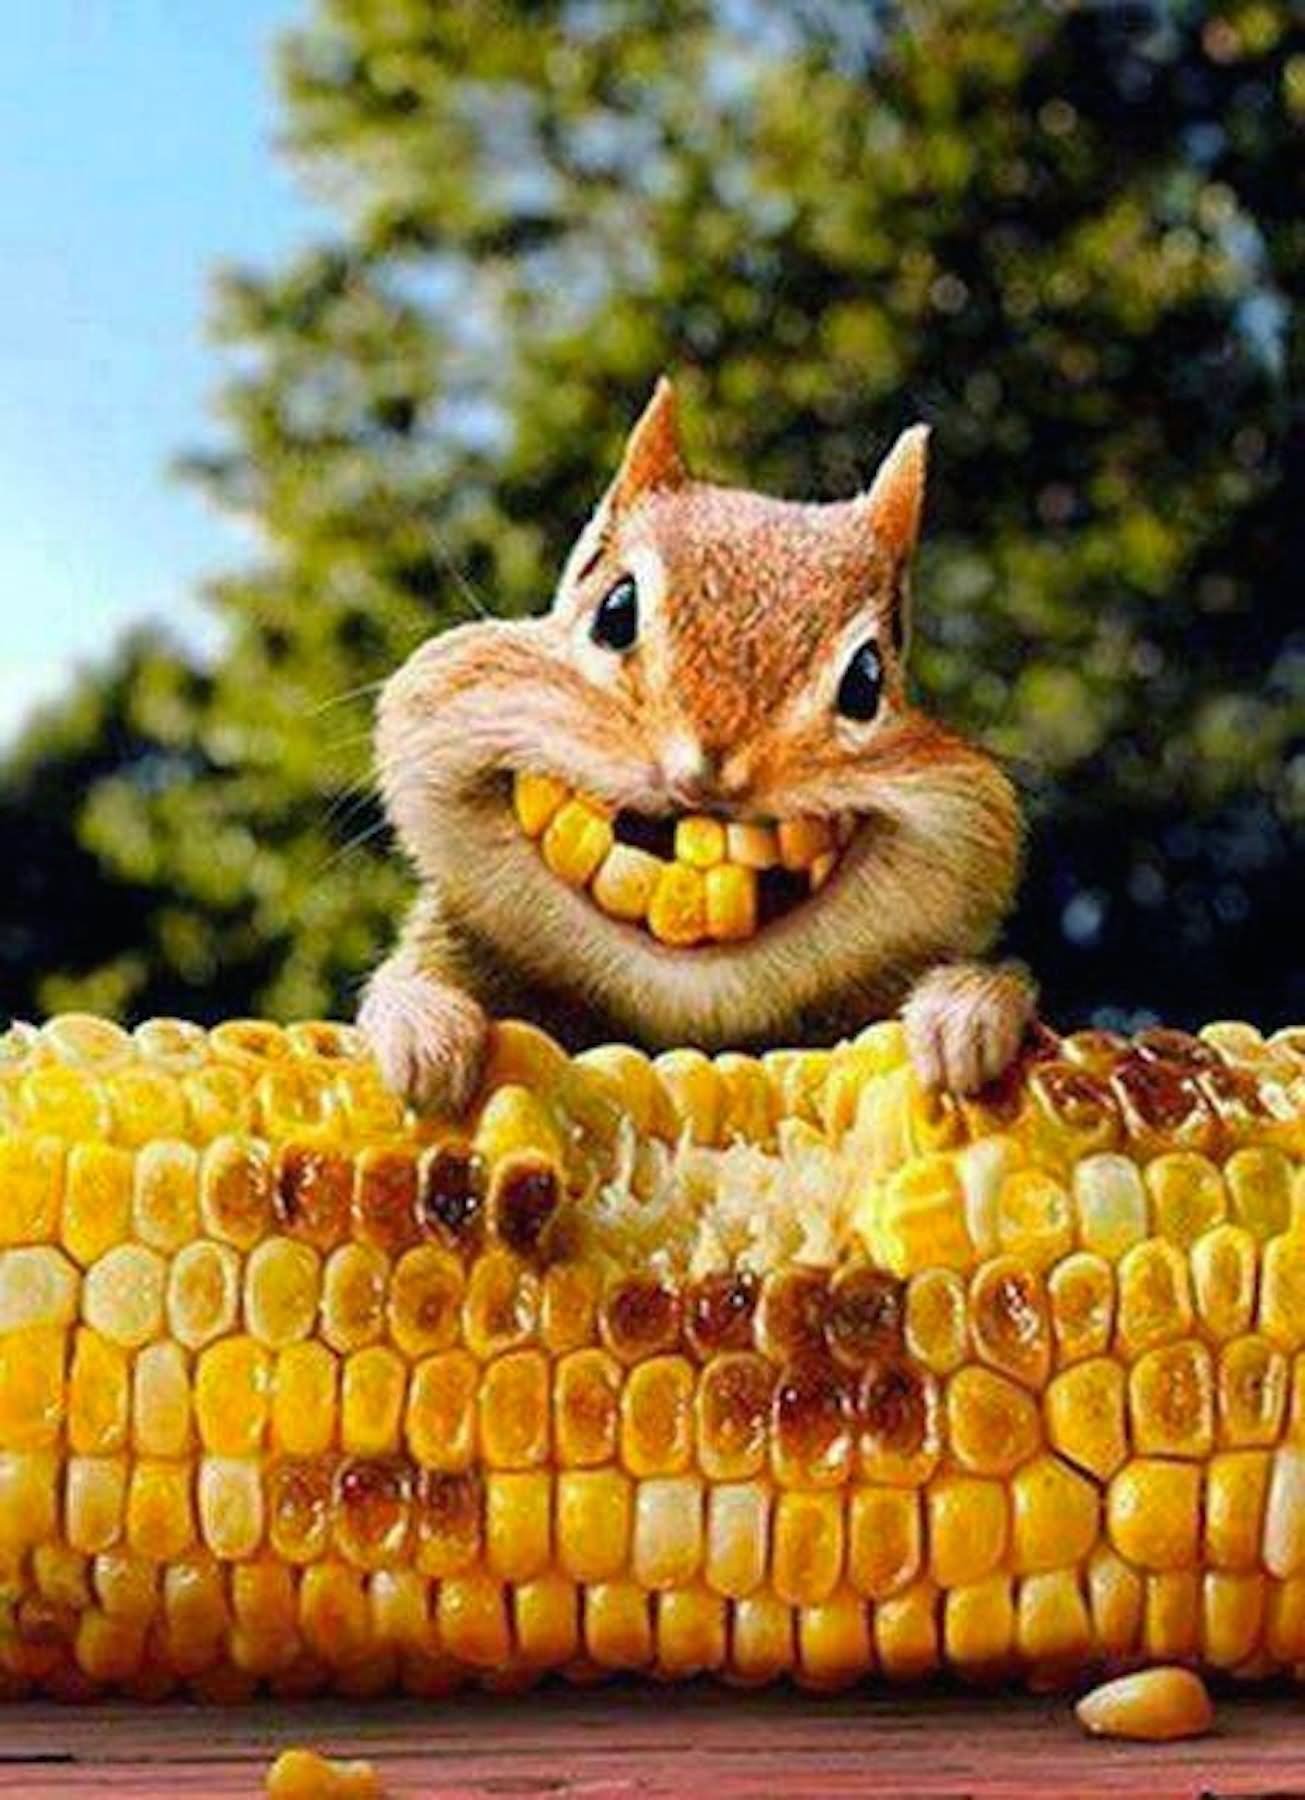 50 Most Funniest Chipmunk Pictures And Photo